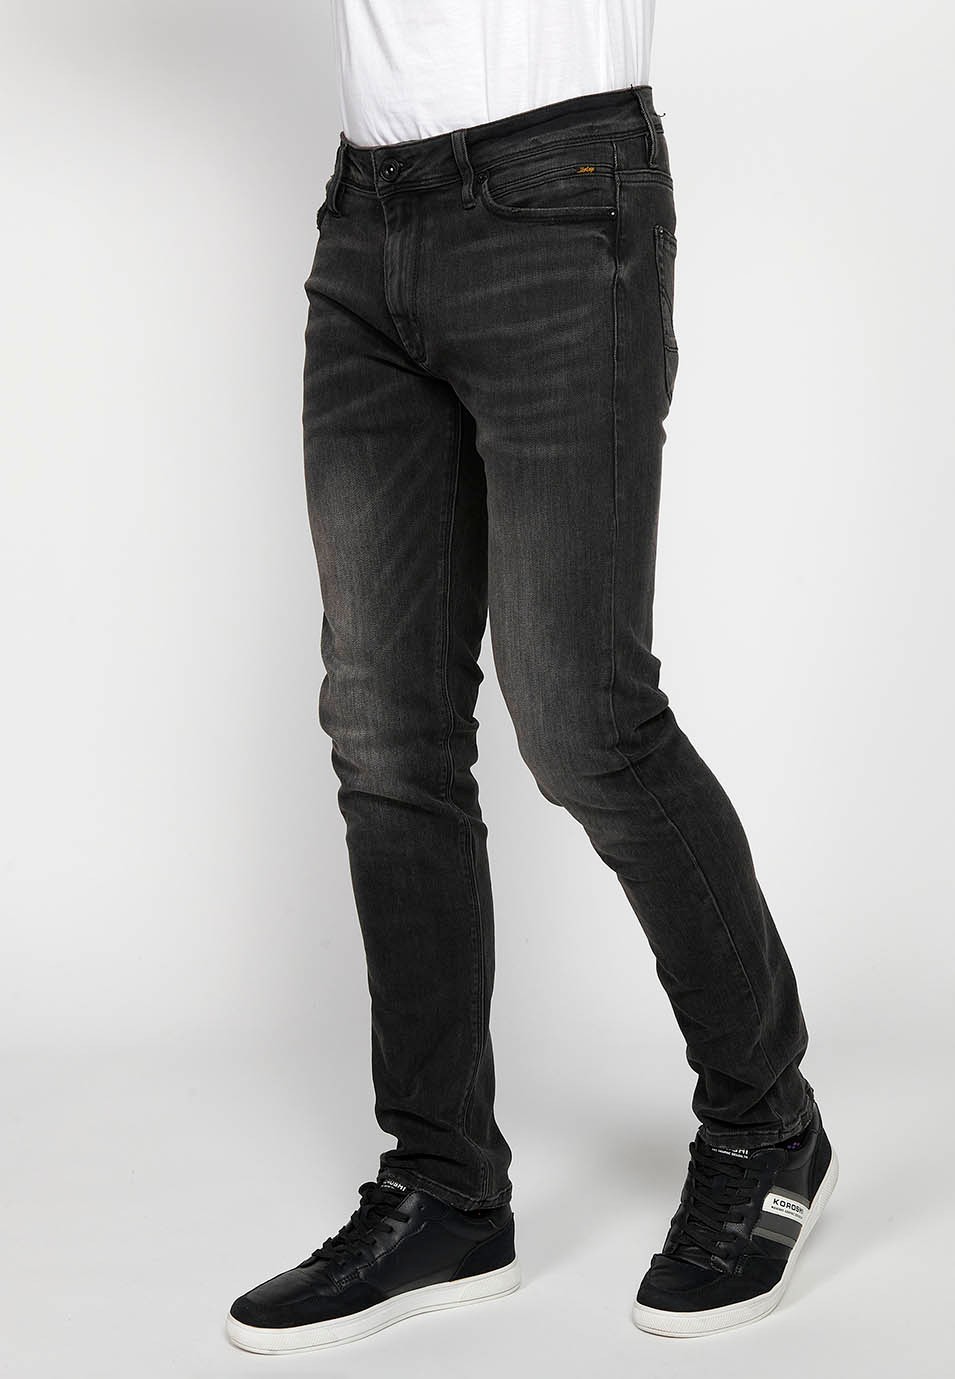 Regular fit long straight jeans with zipper and button front closure in Black Denim for Men 3